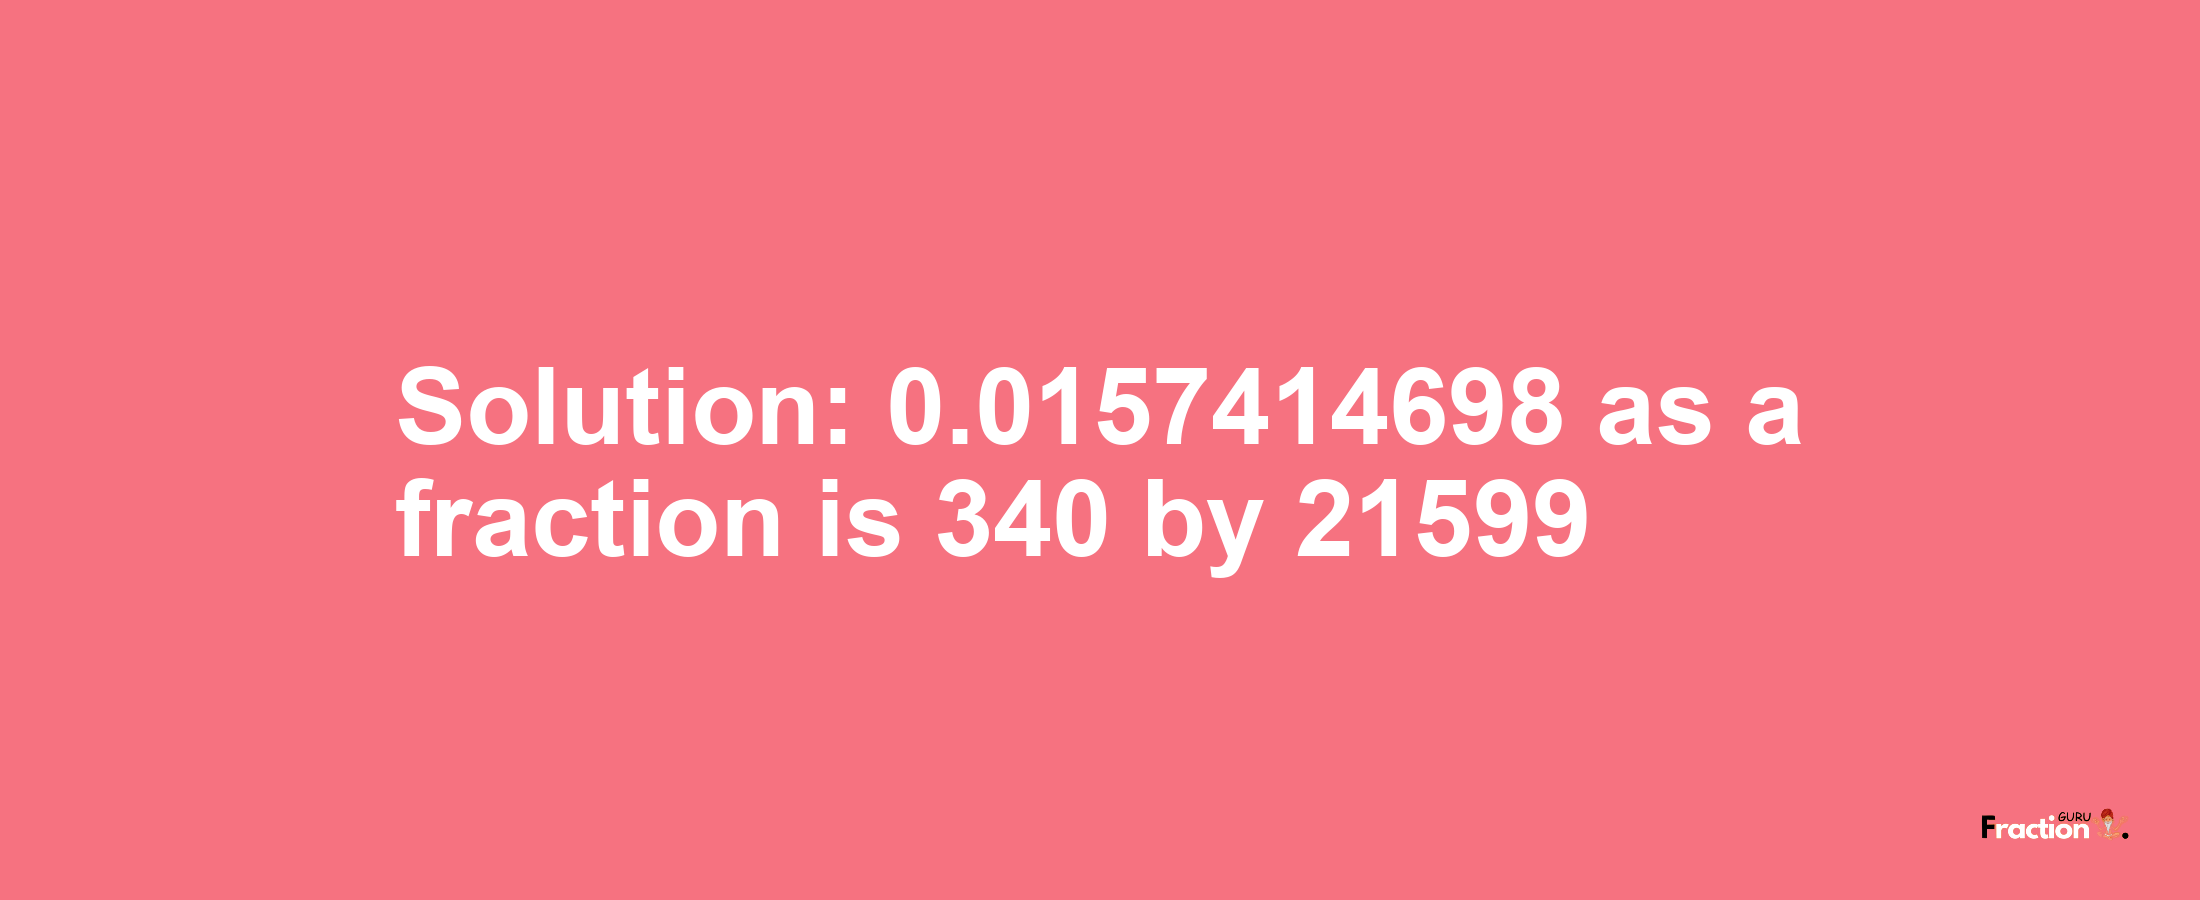 Solution:0.0157414698 as a fraction is 340/21599